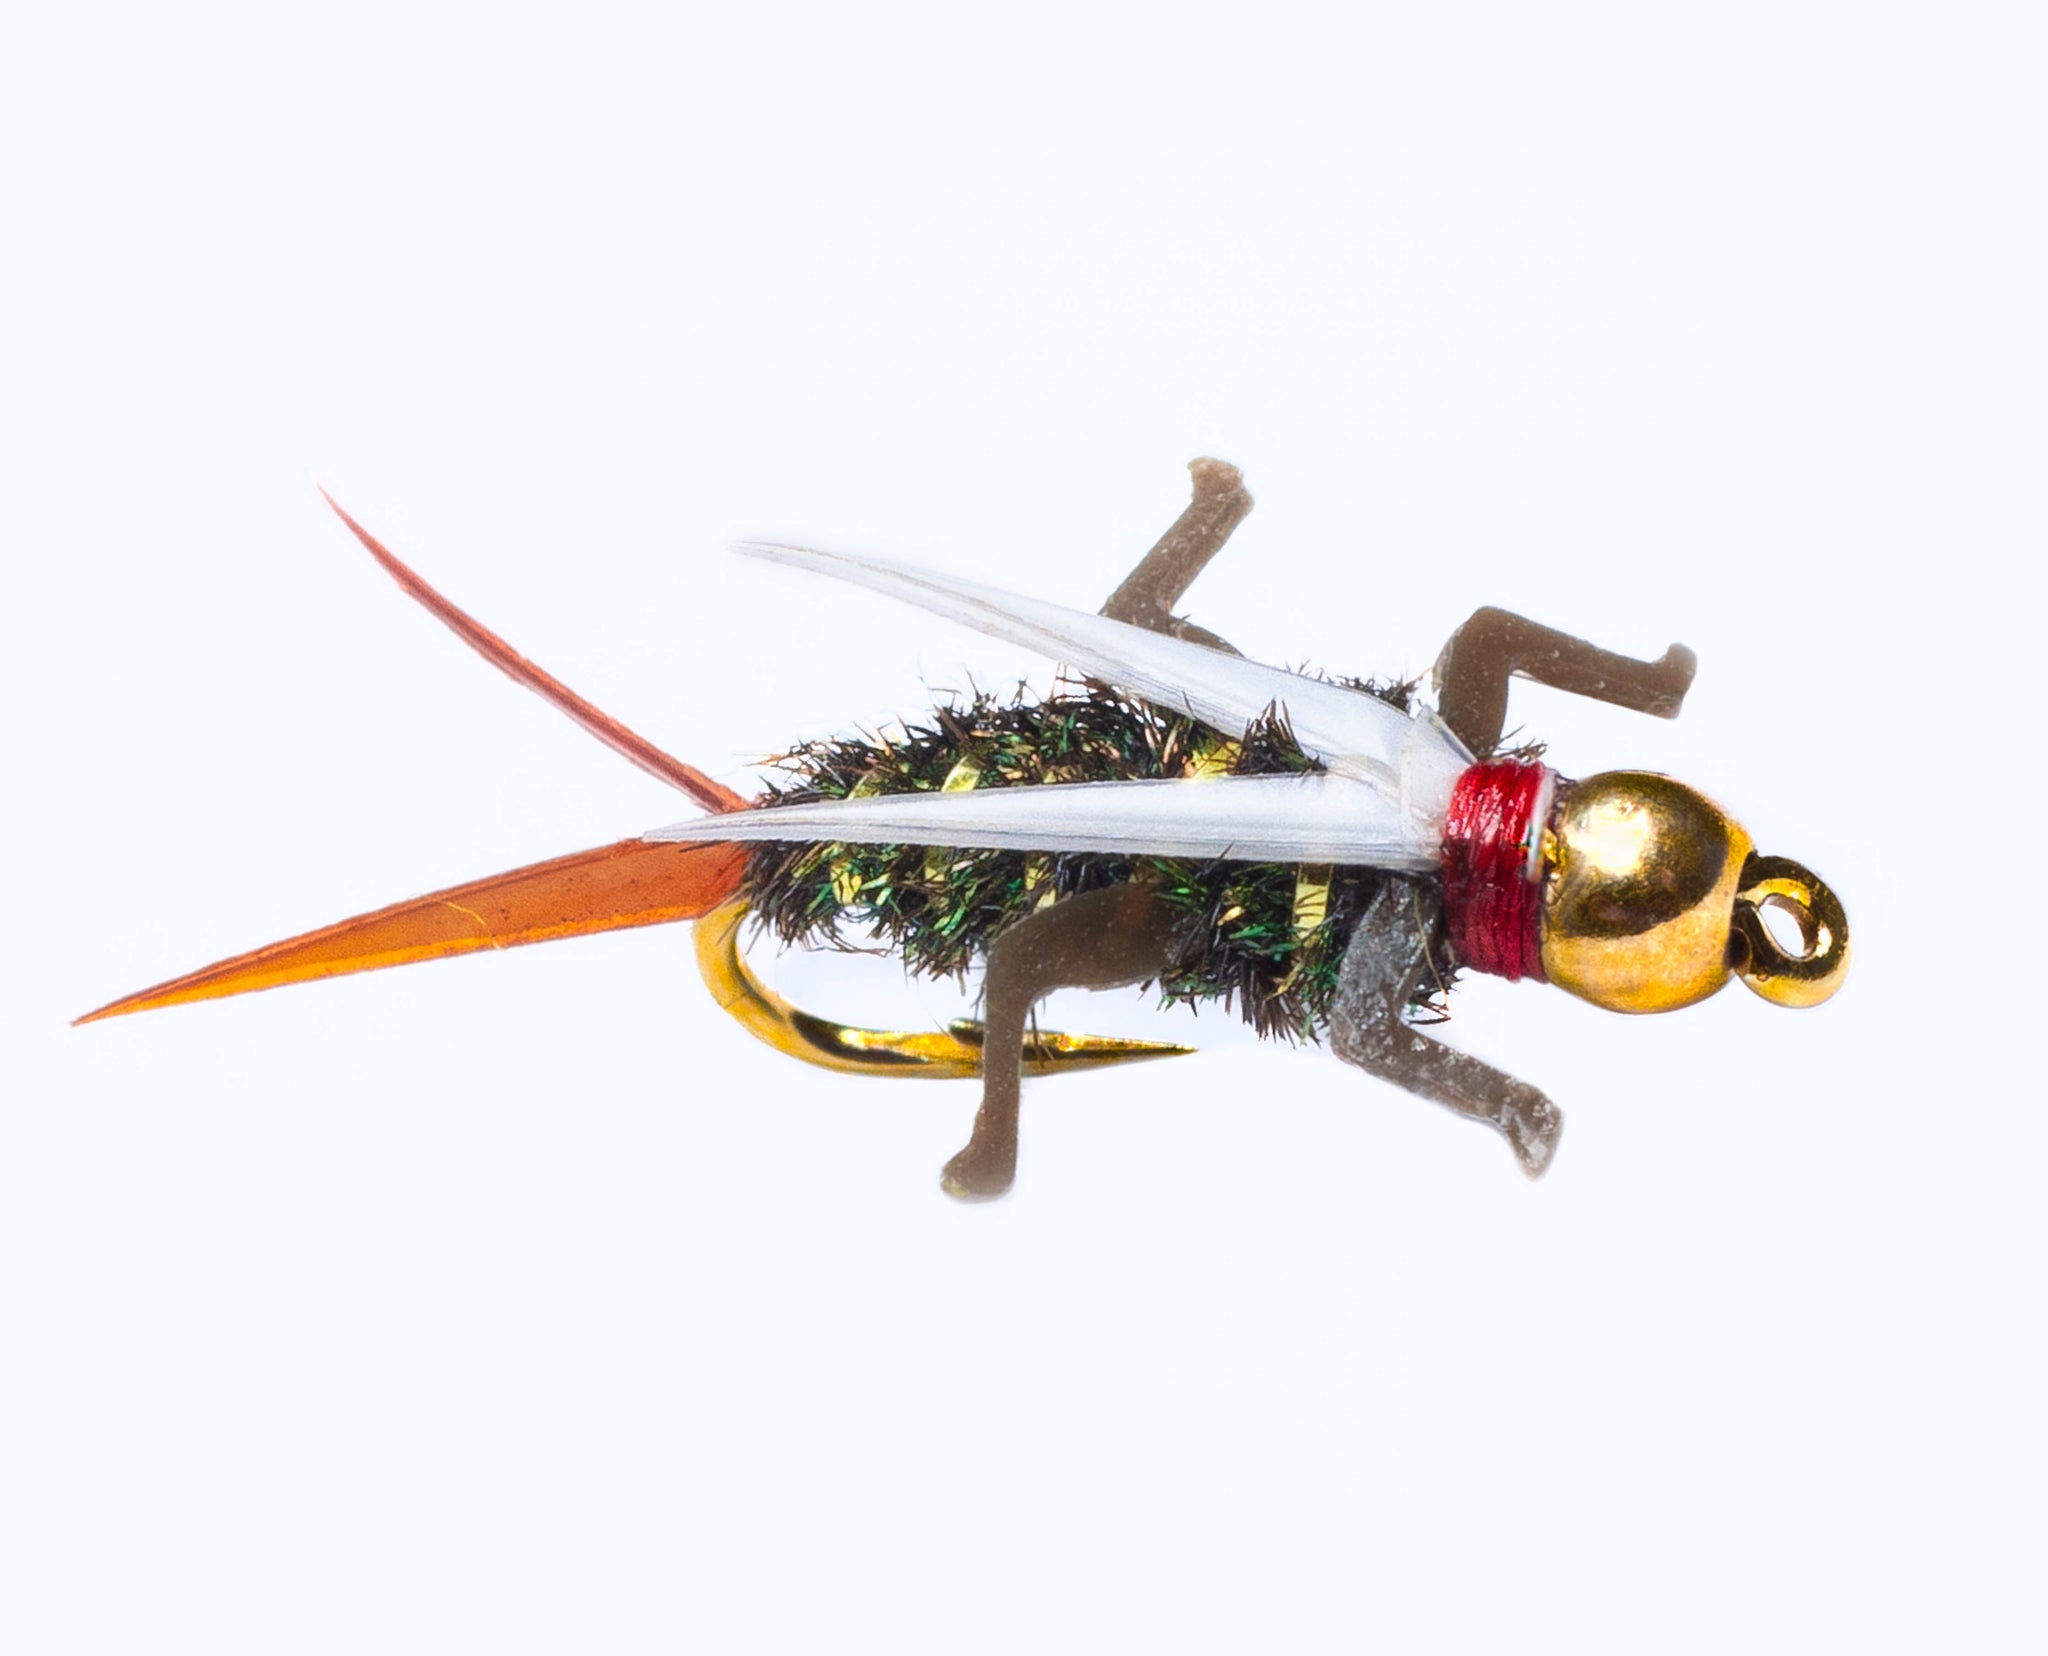 Fly fishing rod with nymphs — Stock Photo © gasaz76 #9550443